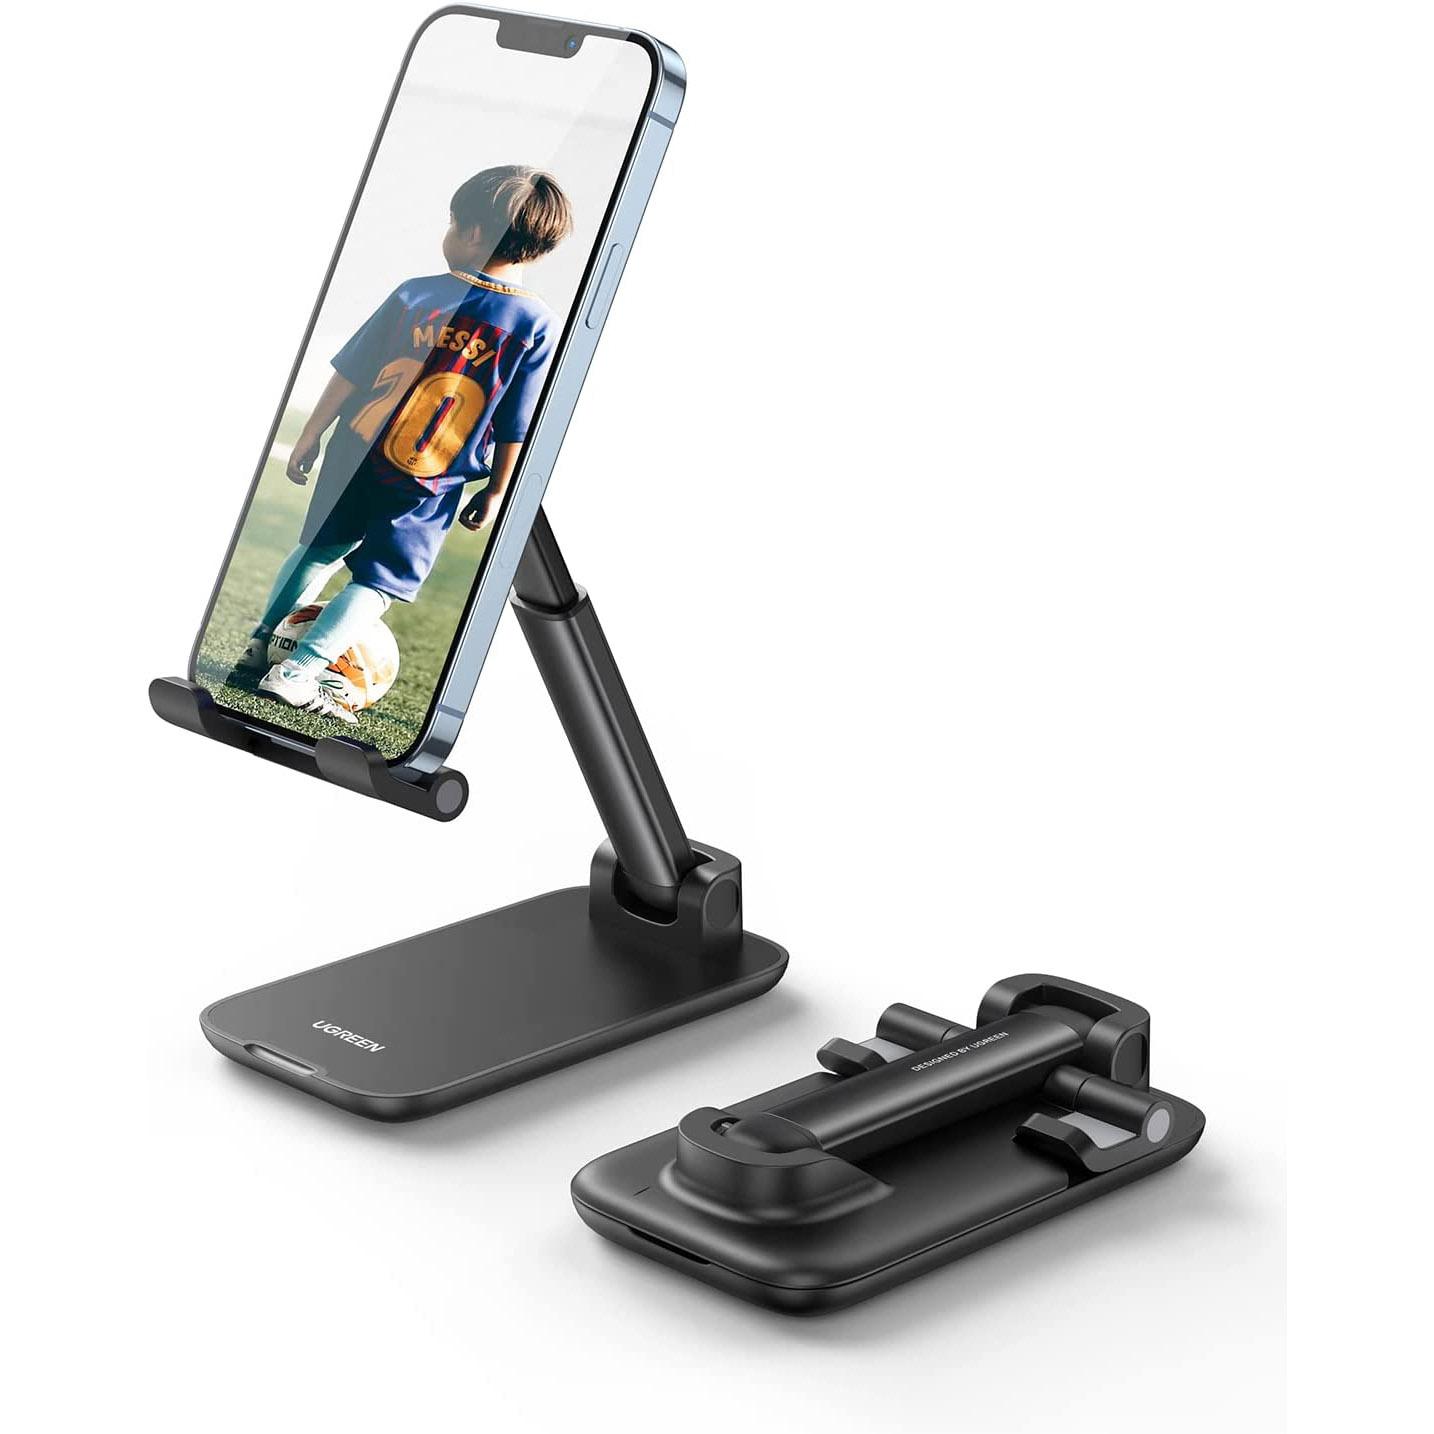 Universal Foldable Smartphone Desk Stand for $6.95